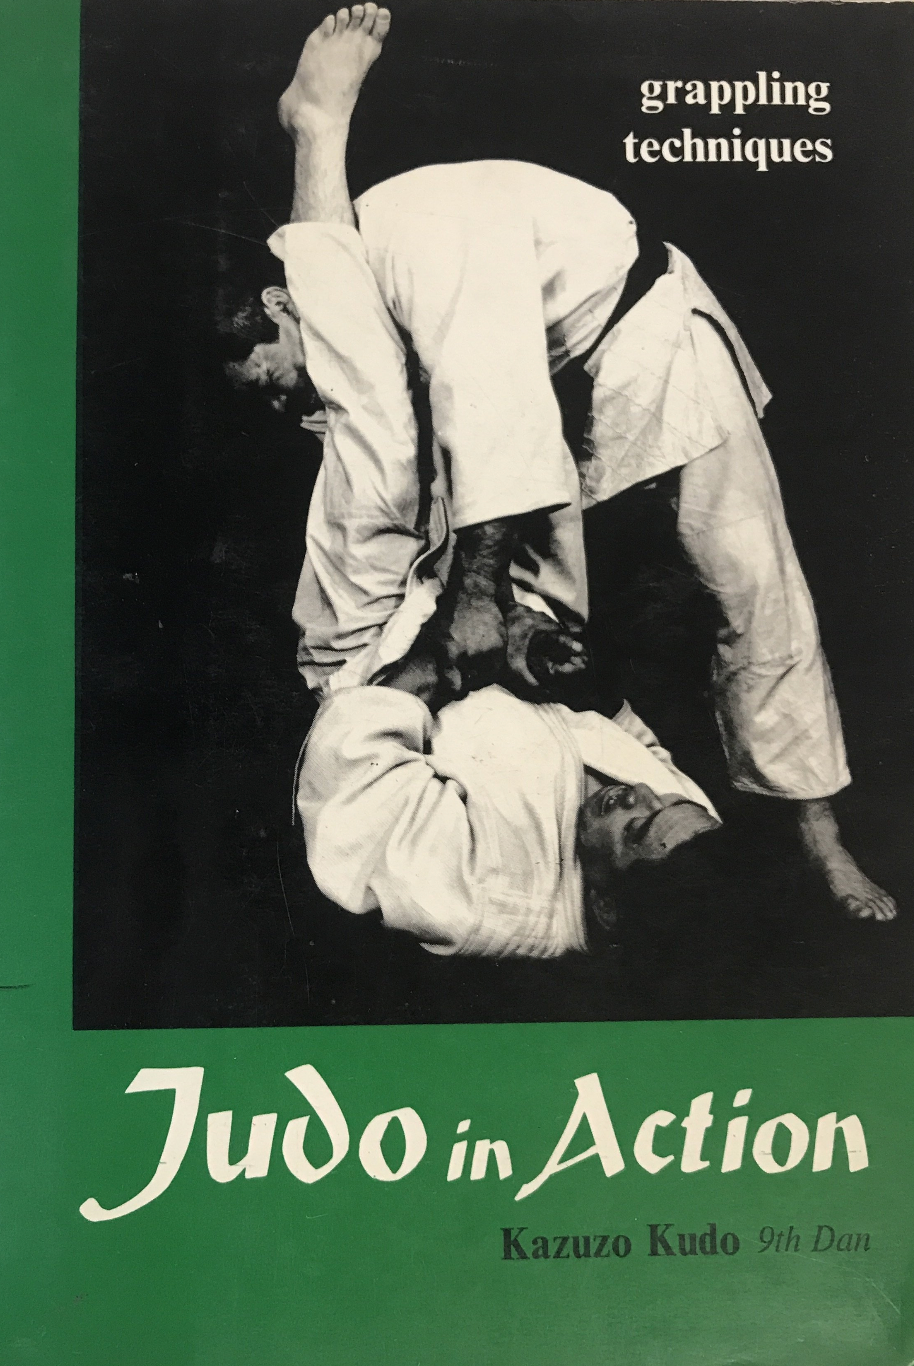 Judo in Action: Grappling Techniques Book by Kazuzo Kudo (Preowned) - Budovideos Inc